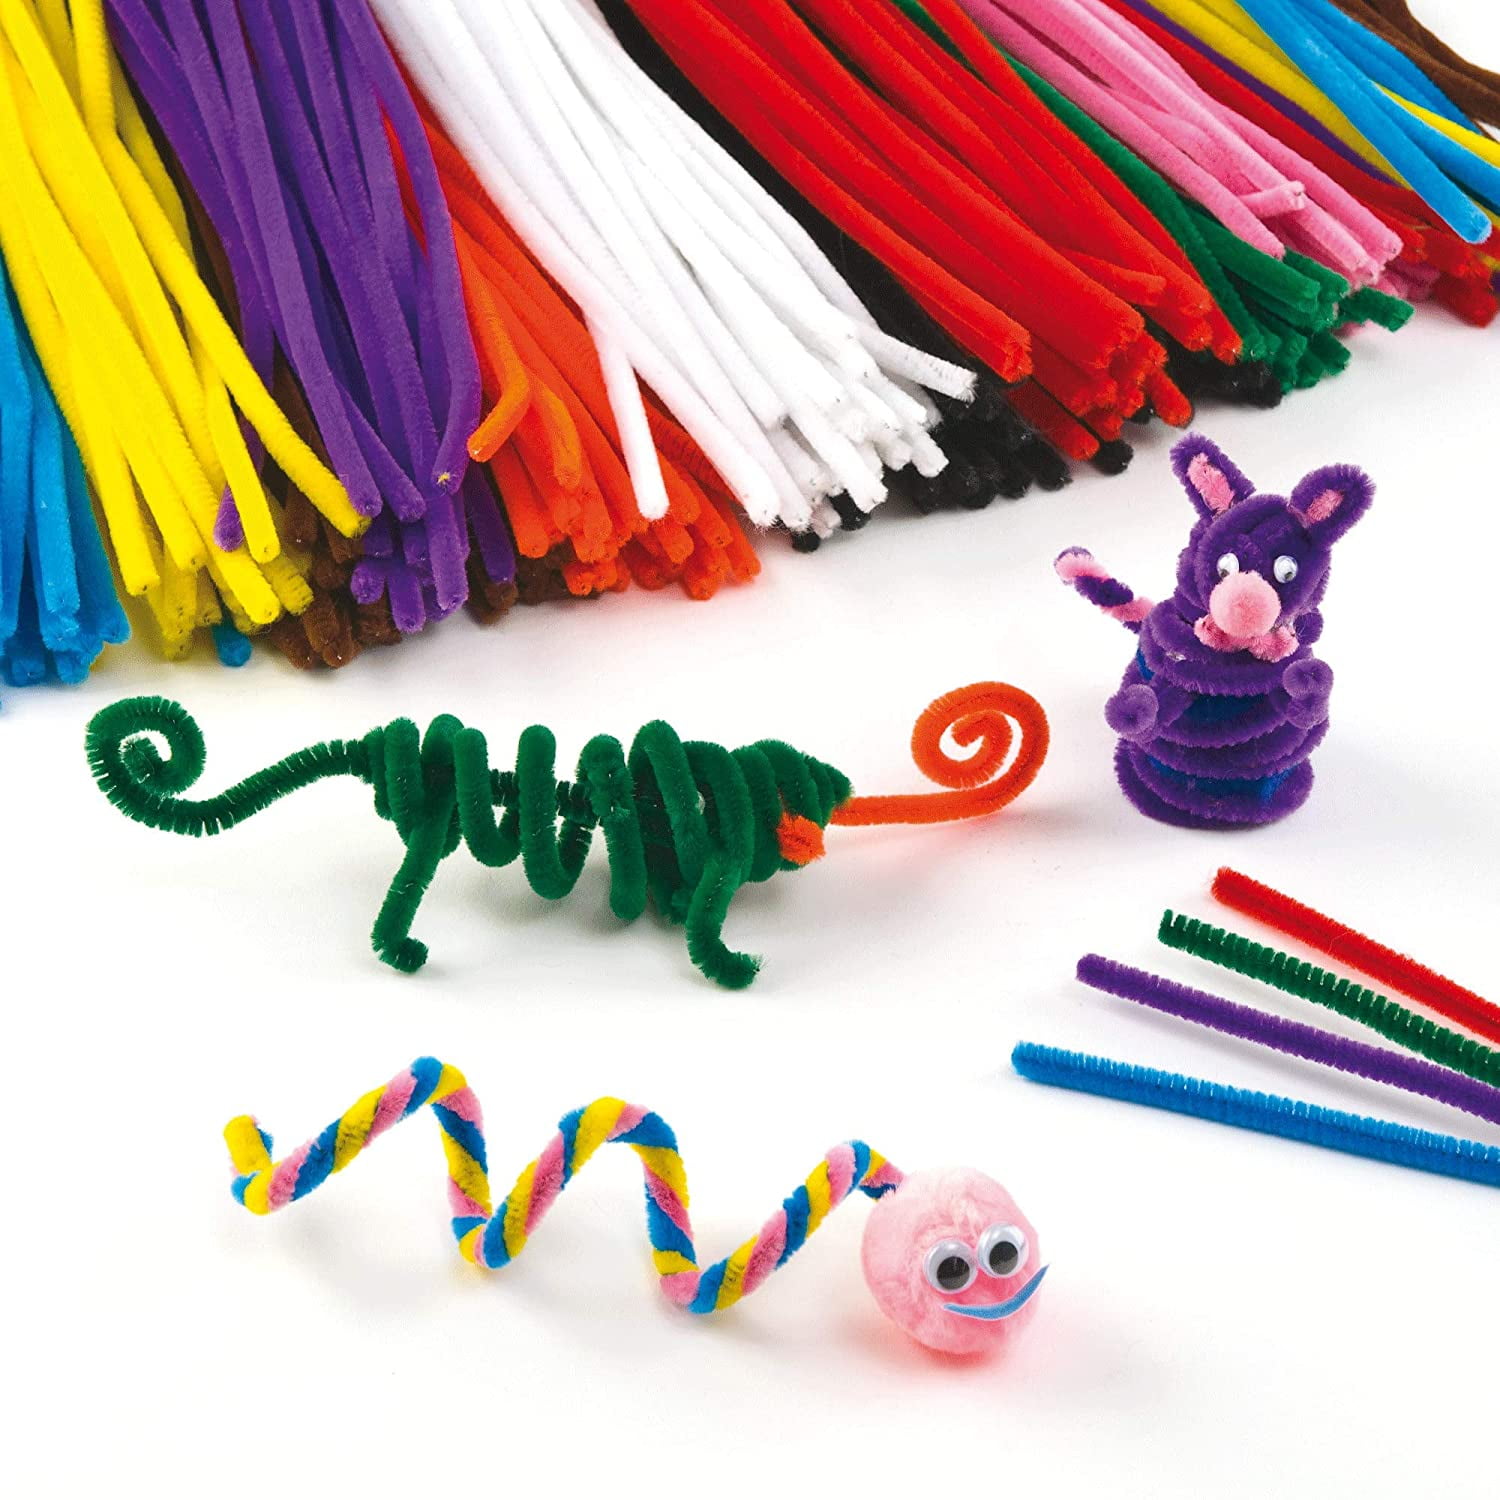 300 Pieces Pipe Cleaners 25 Colors Chenille Stems for DIY Art Creative Crafts Decorations 